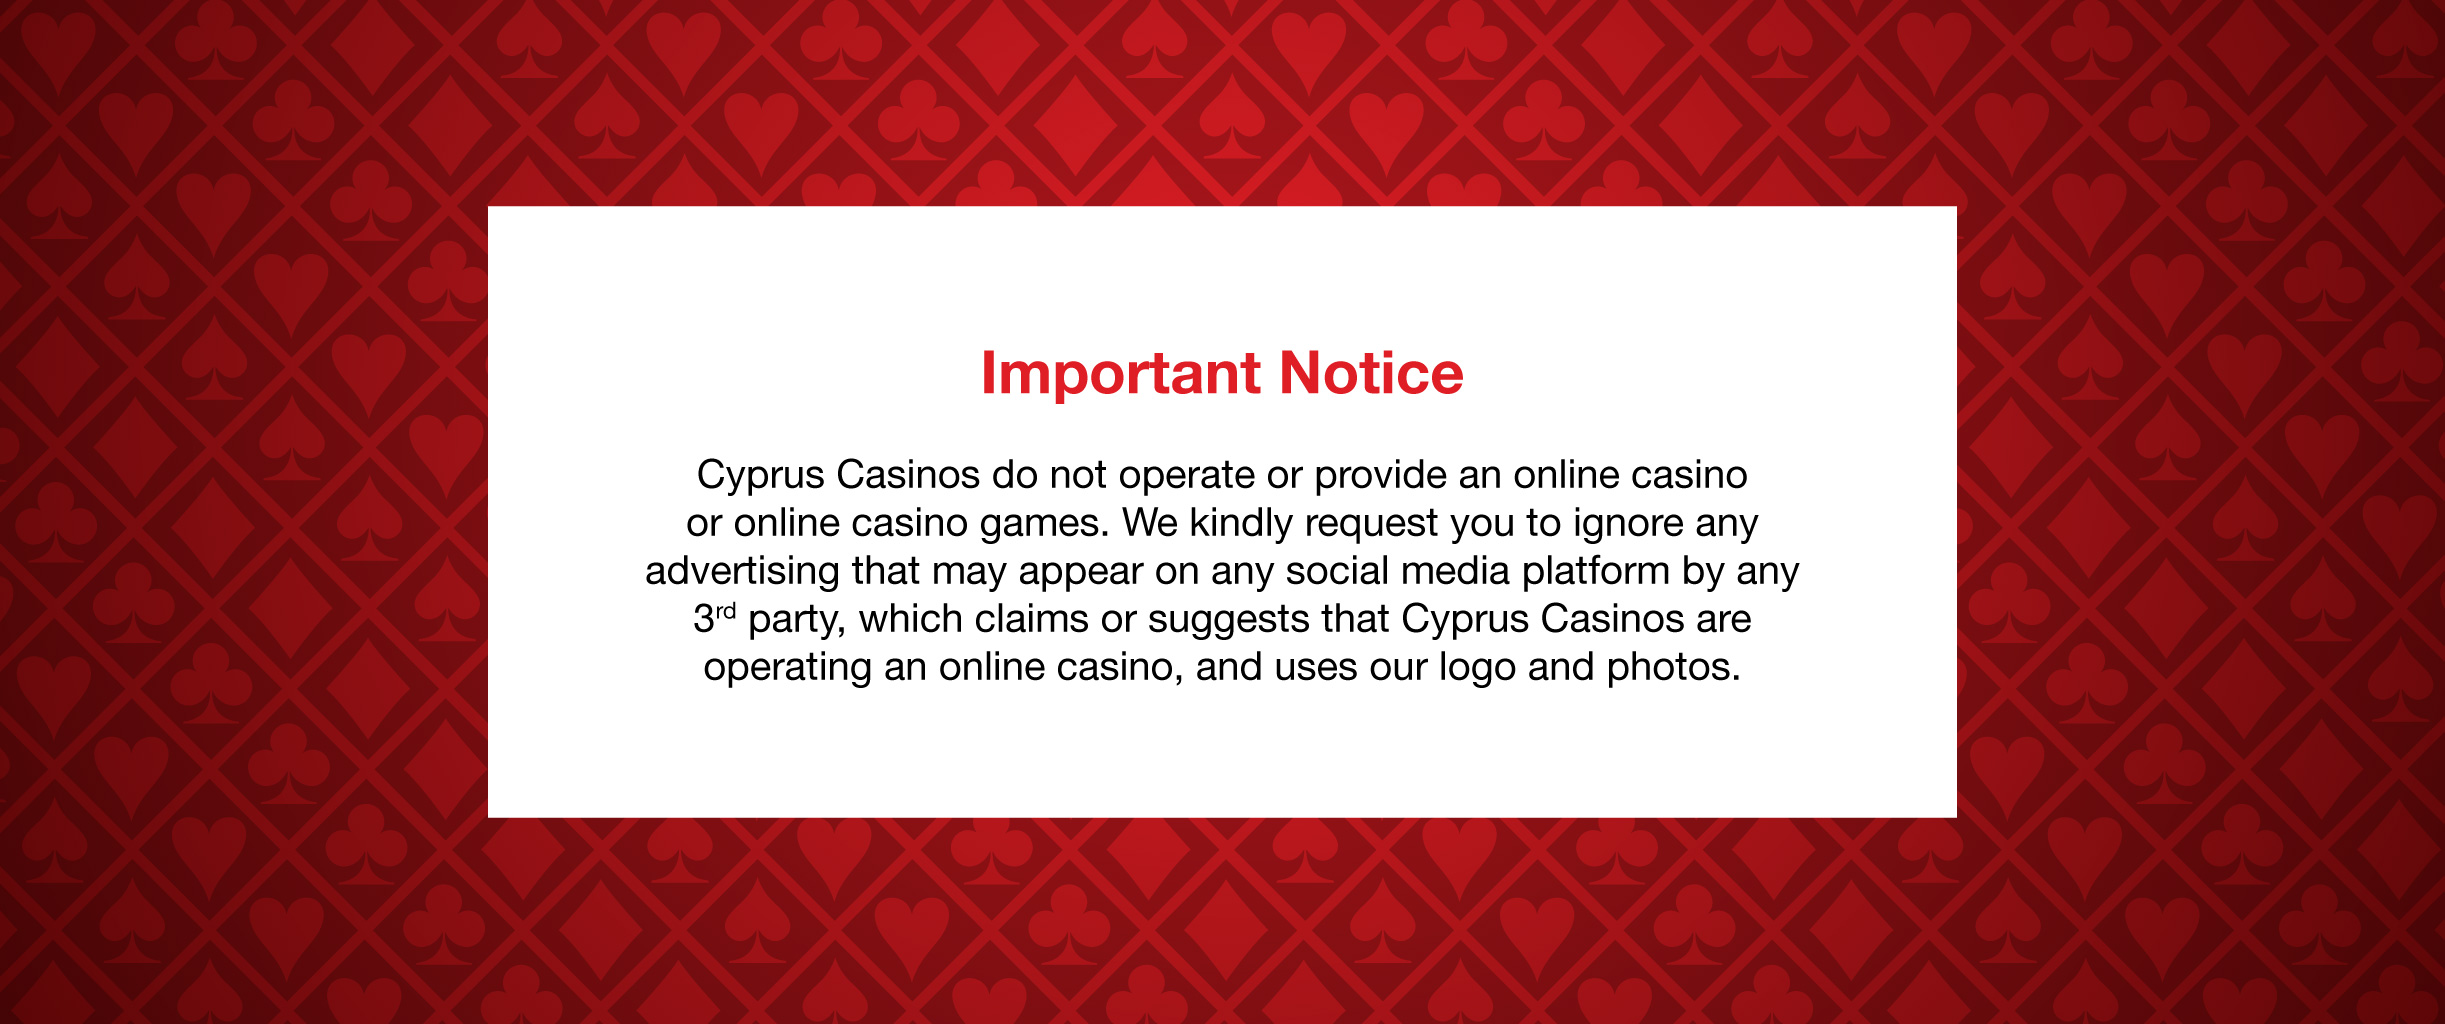 online casinos Cyprus Is Bound To Make An Impact In Your Business